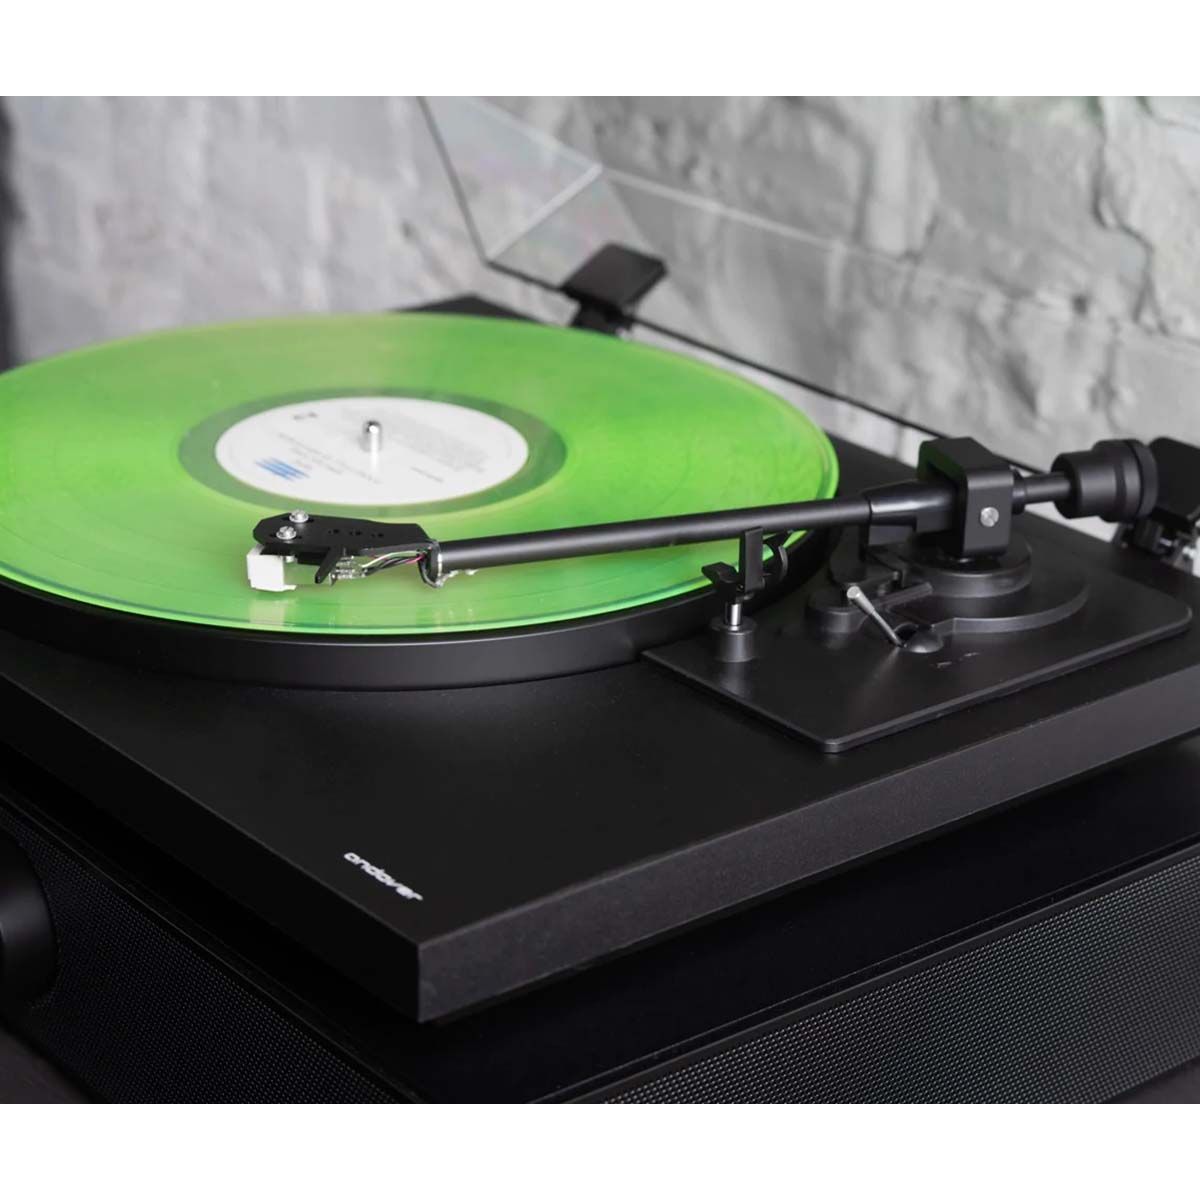 Andover Audio SpinDeck 2 Semi-Automatic Turntable - black with open dustcover - lifestyle image